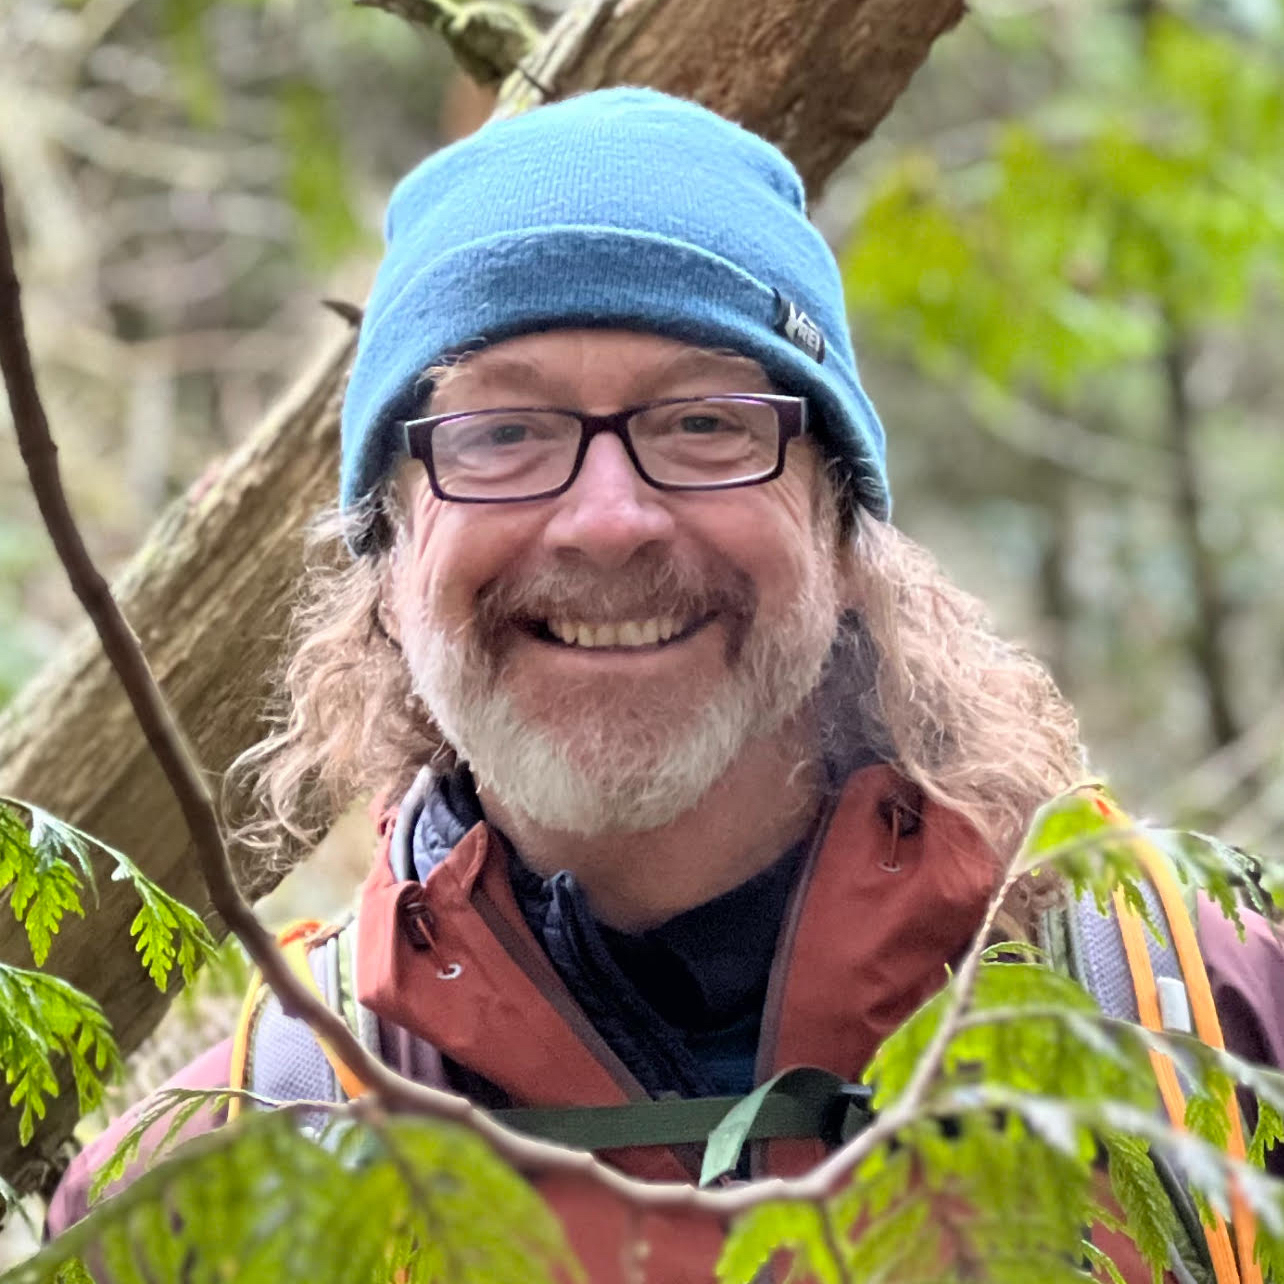 Dr Sherwood in a blue hat and burgundy rain jacket smiles in the forest, among the trees.